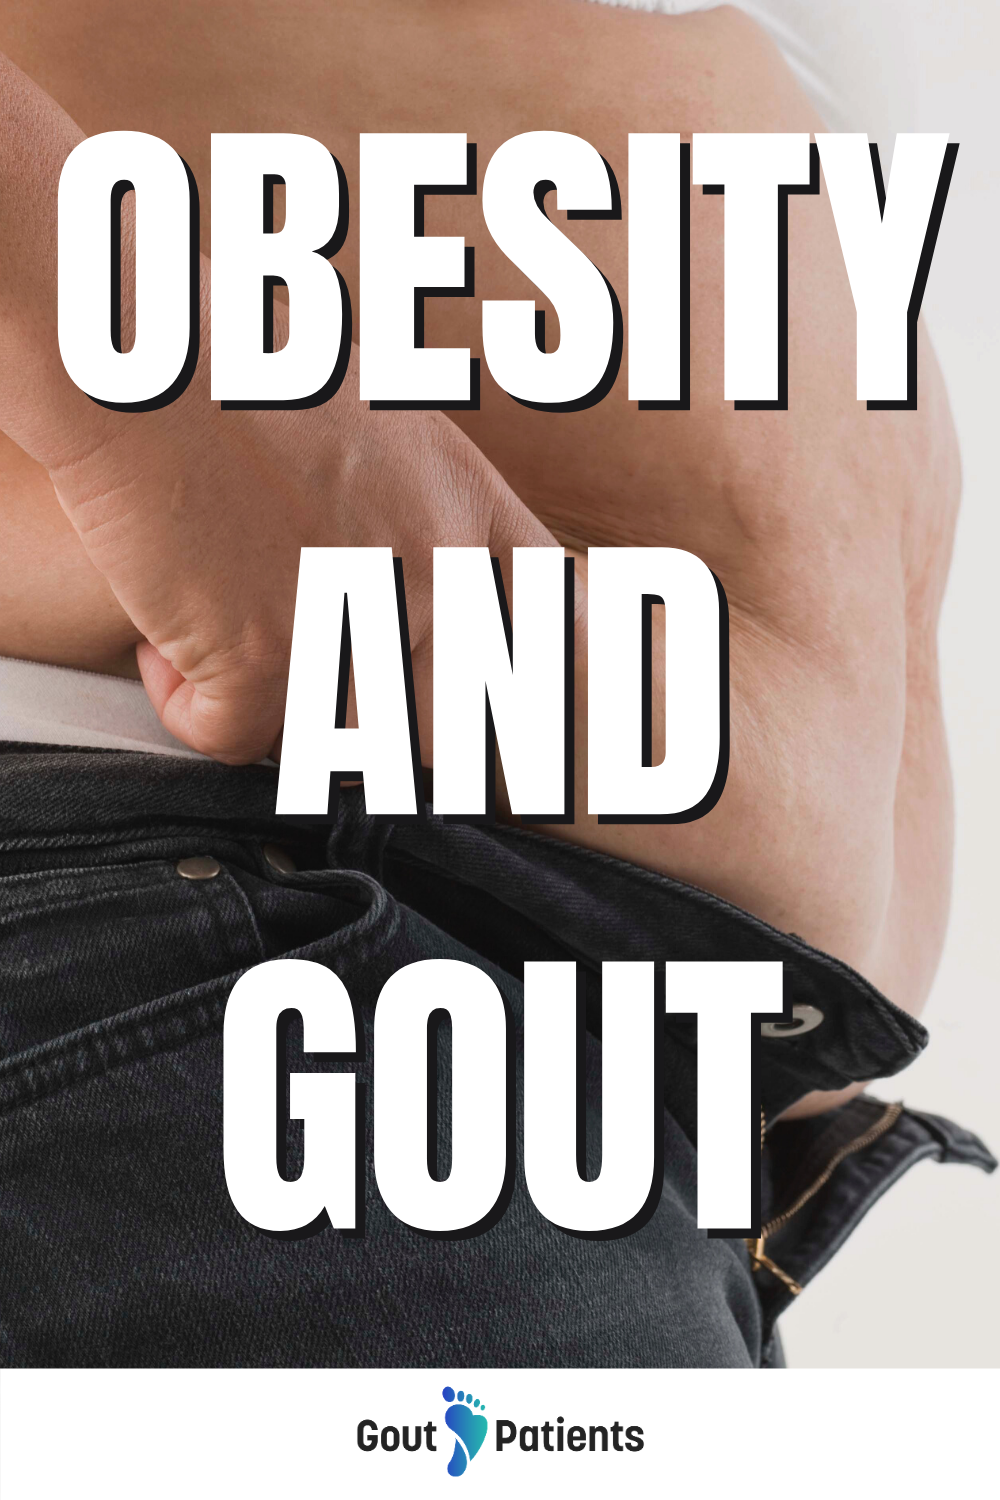 Obesity and Gout